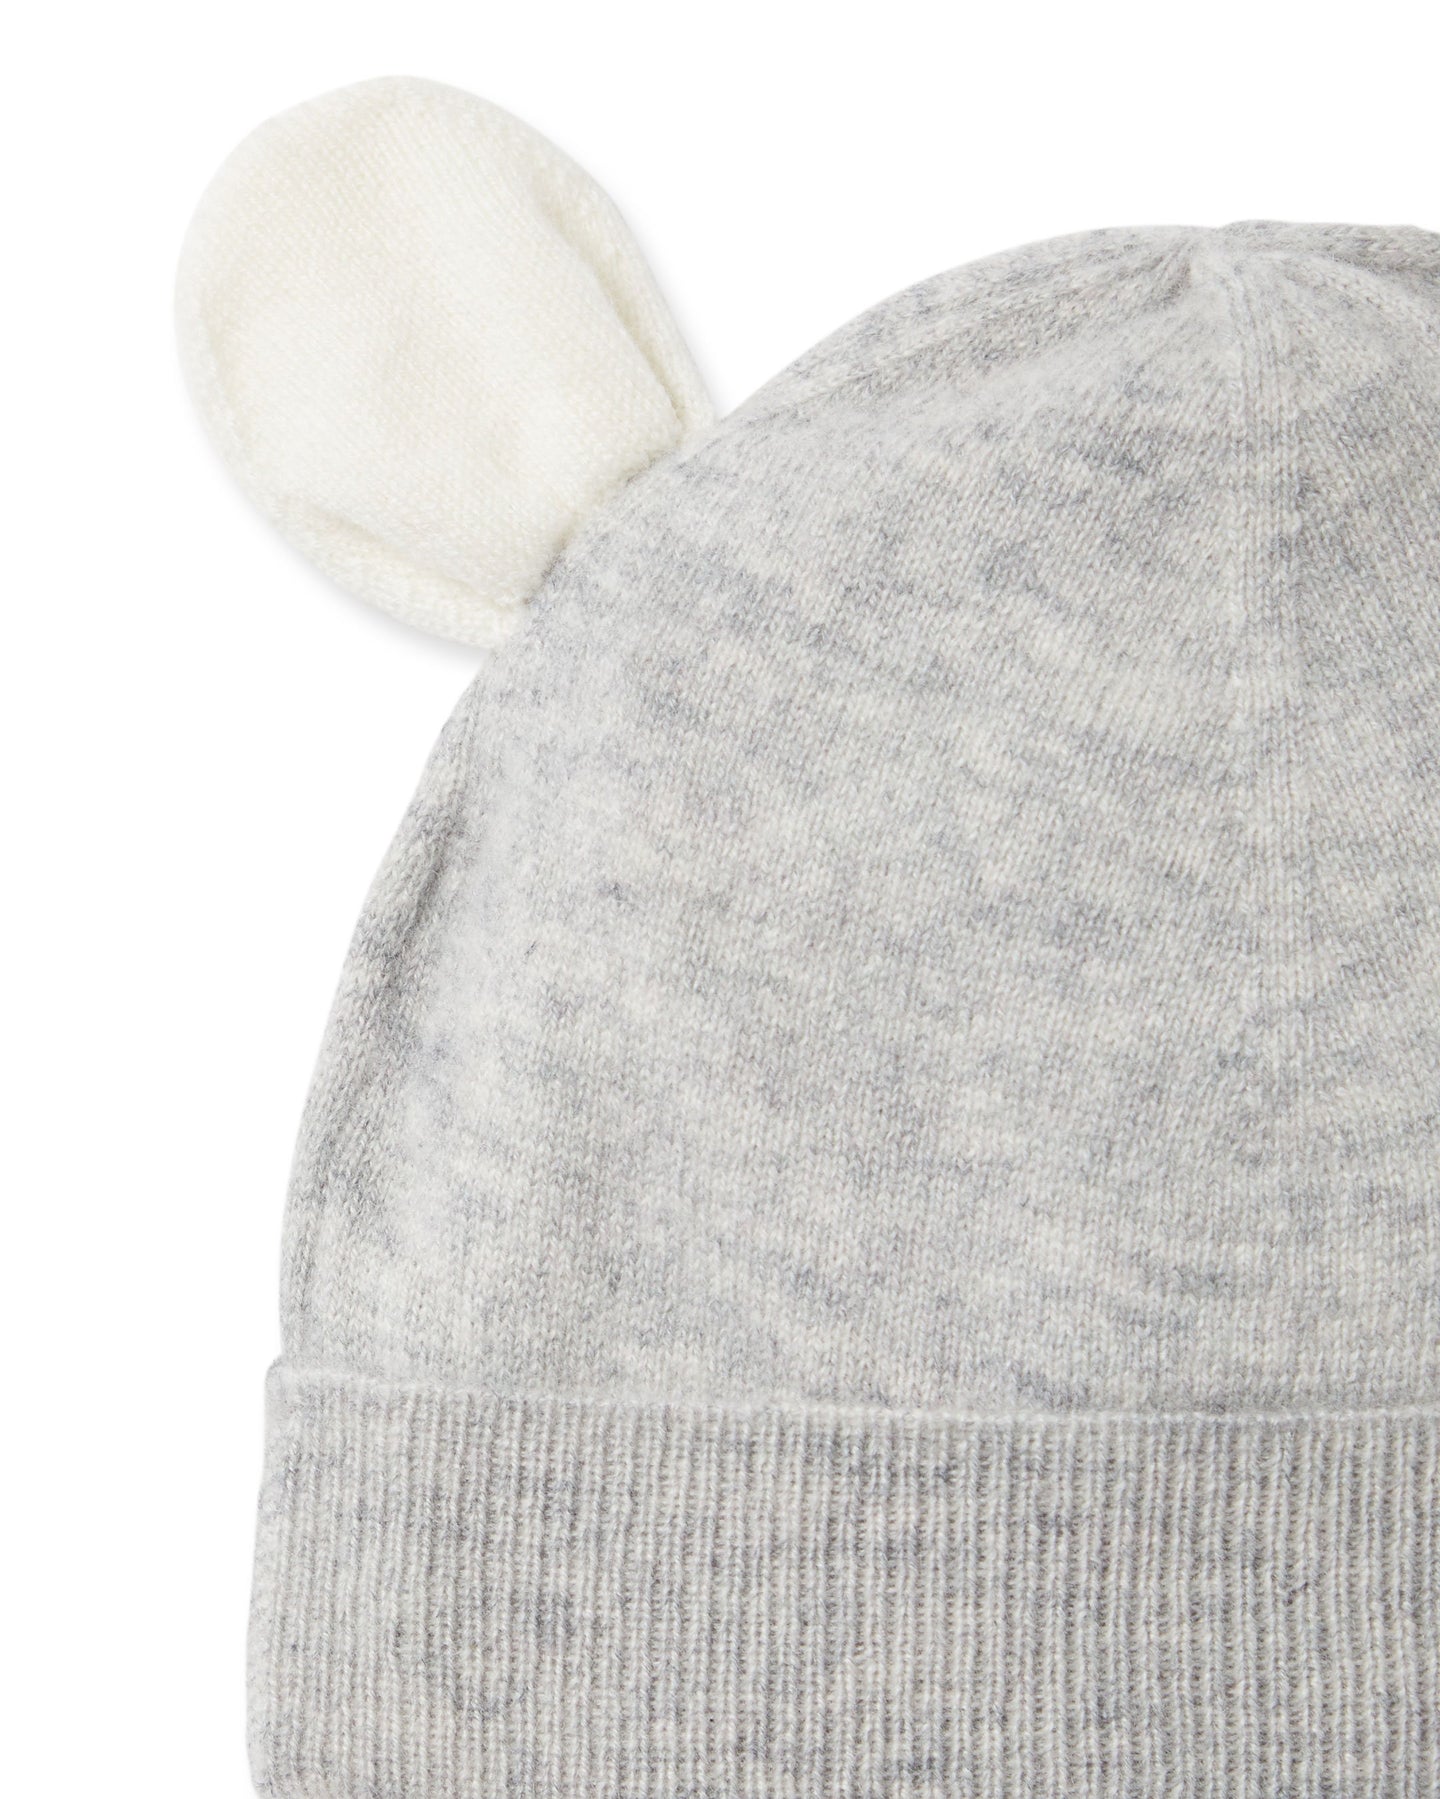 N.Peal Panda Cashmere Hat Fumo Grey New Ivory White